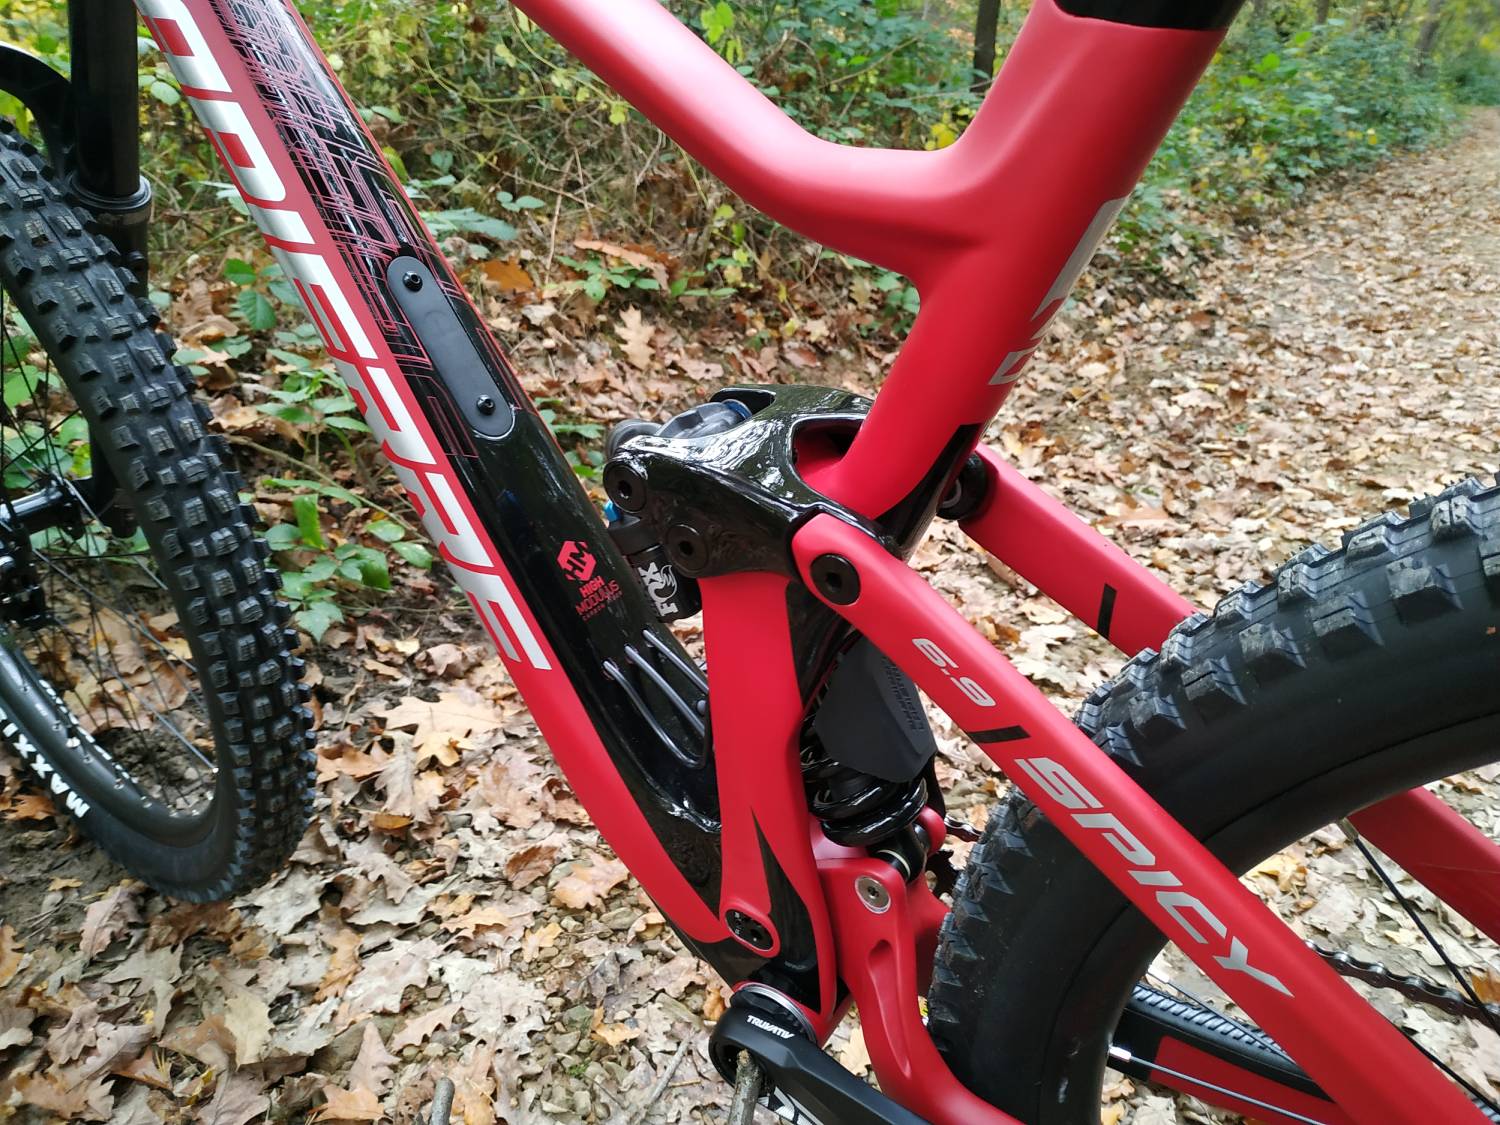 Lapierre Spicy SF 6.9